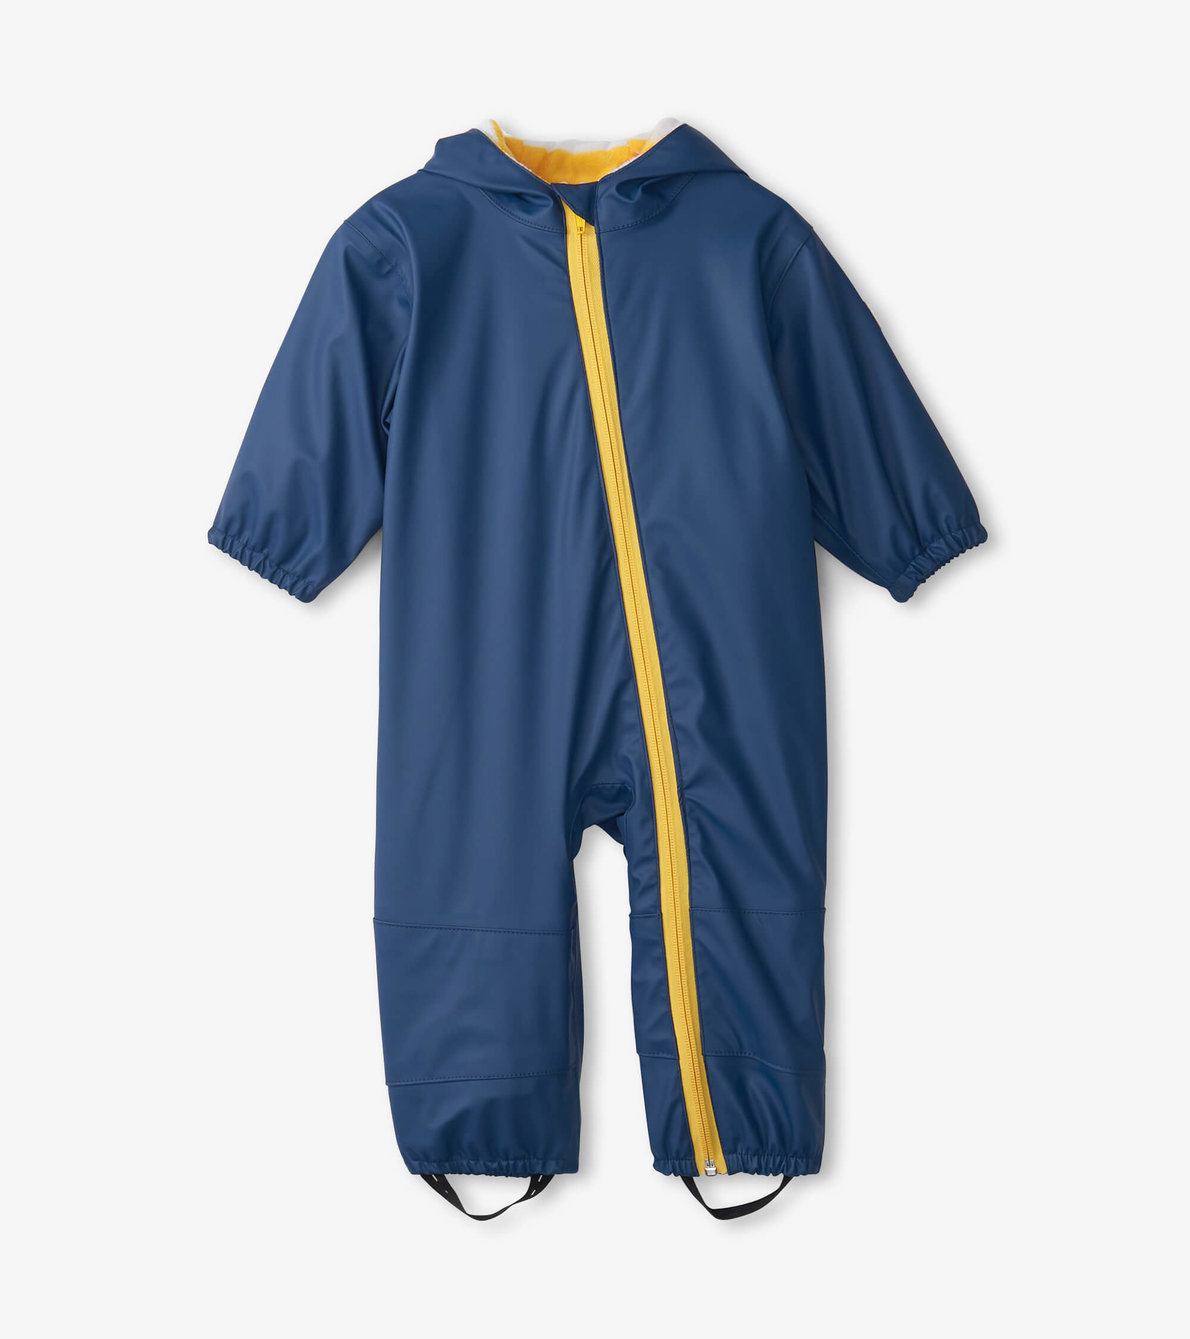 View larger image of Navy Terry Lined Baby Rain Suit